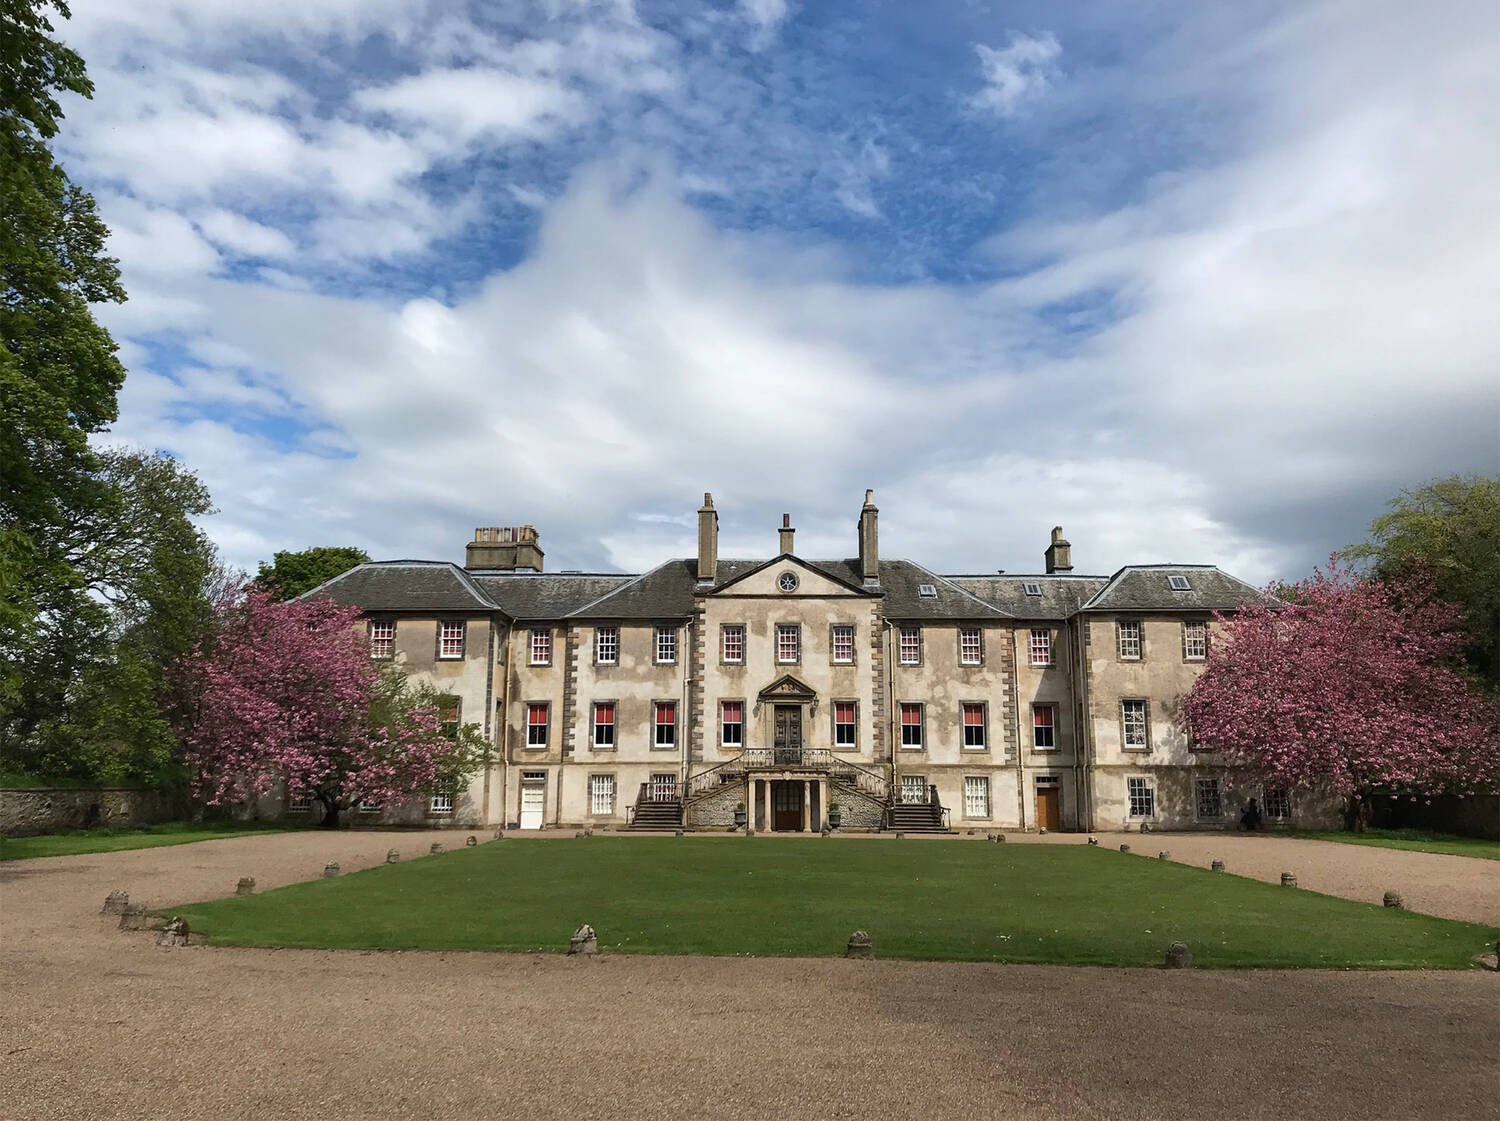 A view of the grand entrance to Newhailes House, with two pink flowering blossom trees either side of the main building. A gravel drive sweeps up to the entrance staircase.